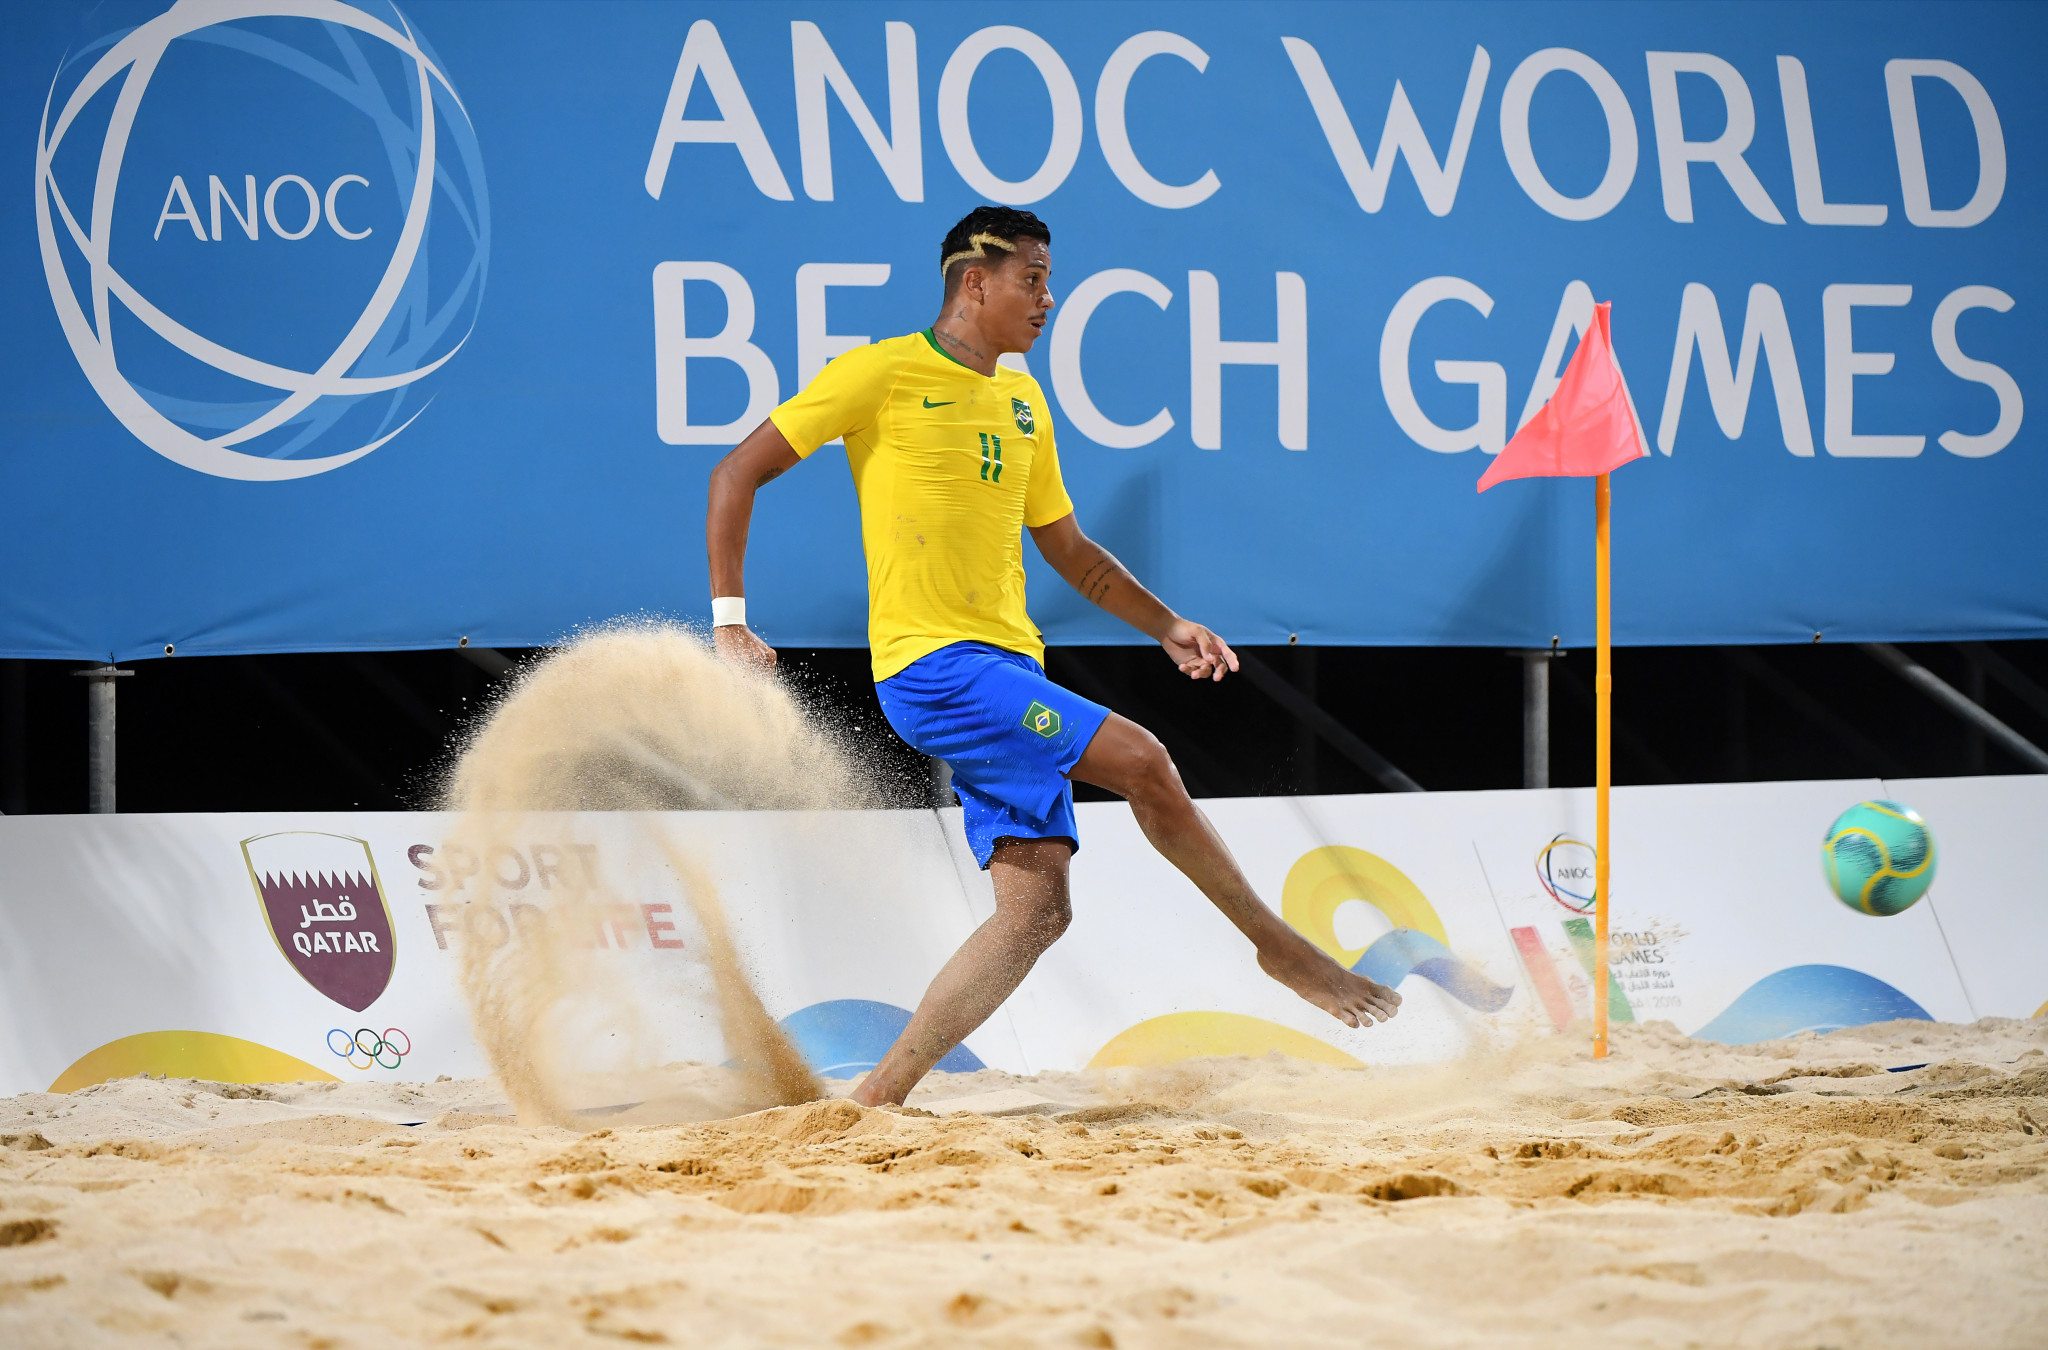 The successor to Qatar as ANOC World Beach Games host should be revealed tomorrow ©Getty Images